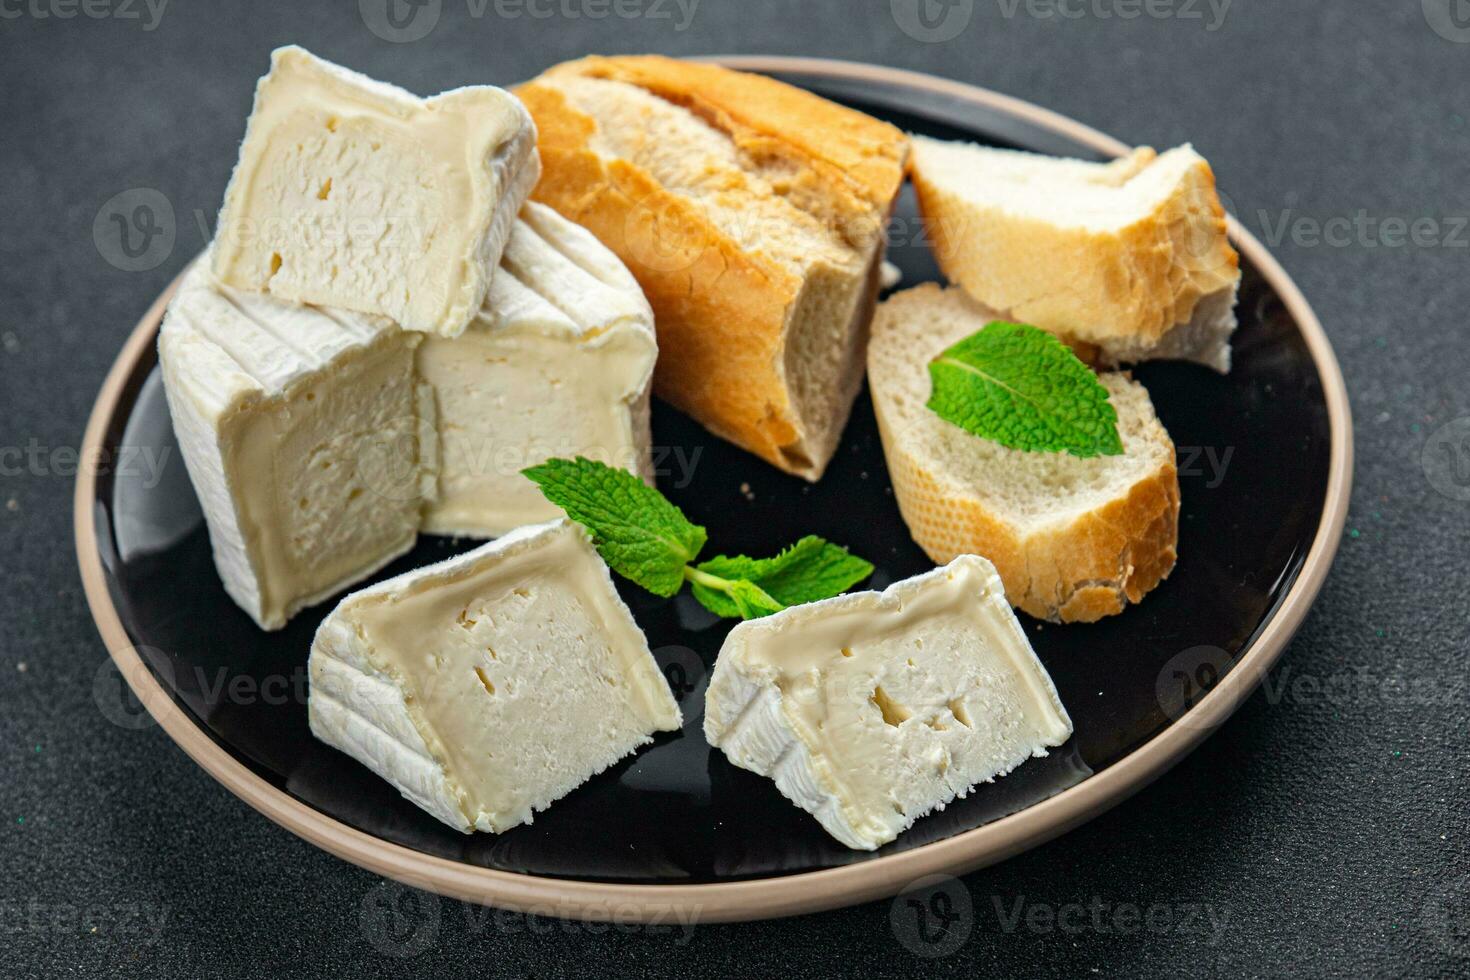 aged country cheese soft cheese white mold creamy taste eating cooking appetizer meal food snack on the table copy space food background rustic top view photo